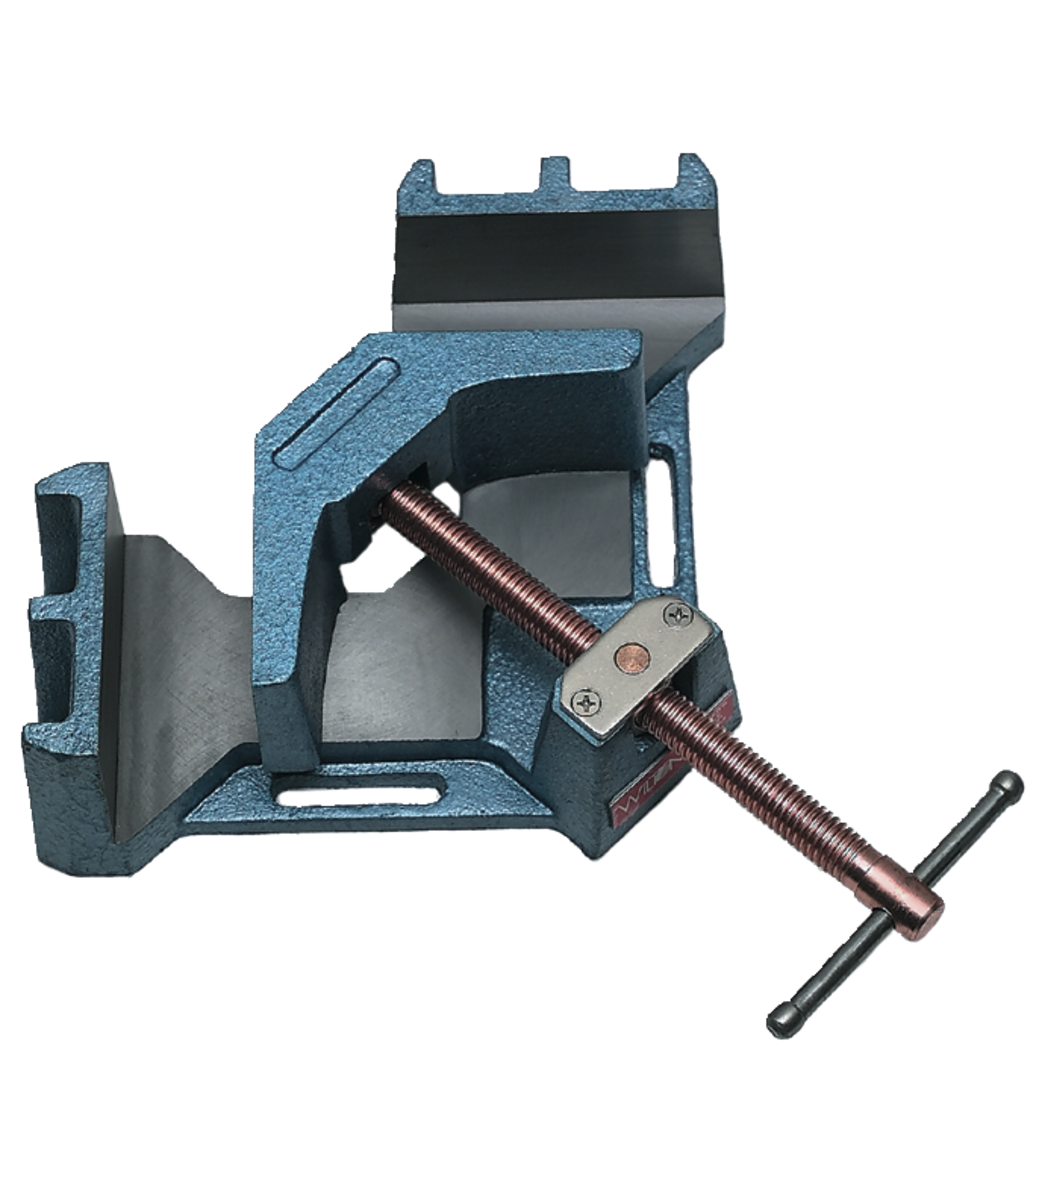 WILTON AC-326 Heavy-Duty Steel Angle Clamp, 4-3/8" Miter Capacity, 2-3/8" Jaw Height, 4-1/8" Jaw Length